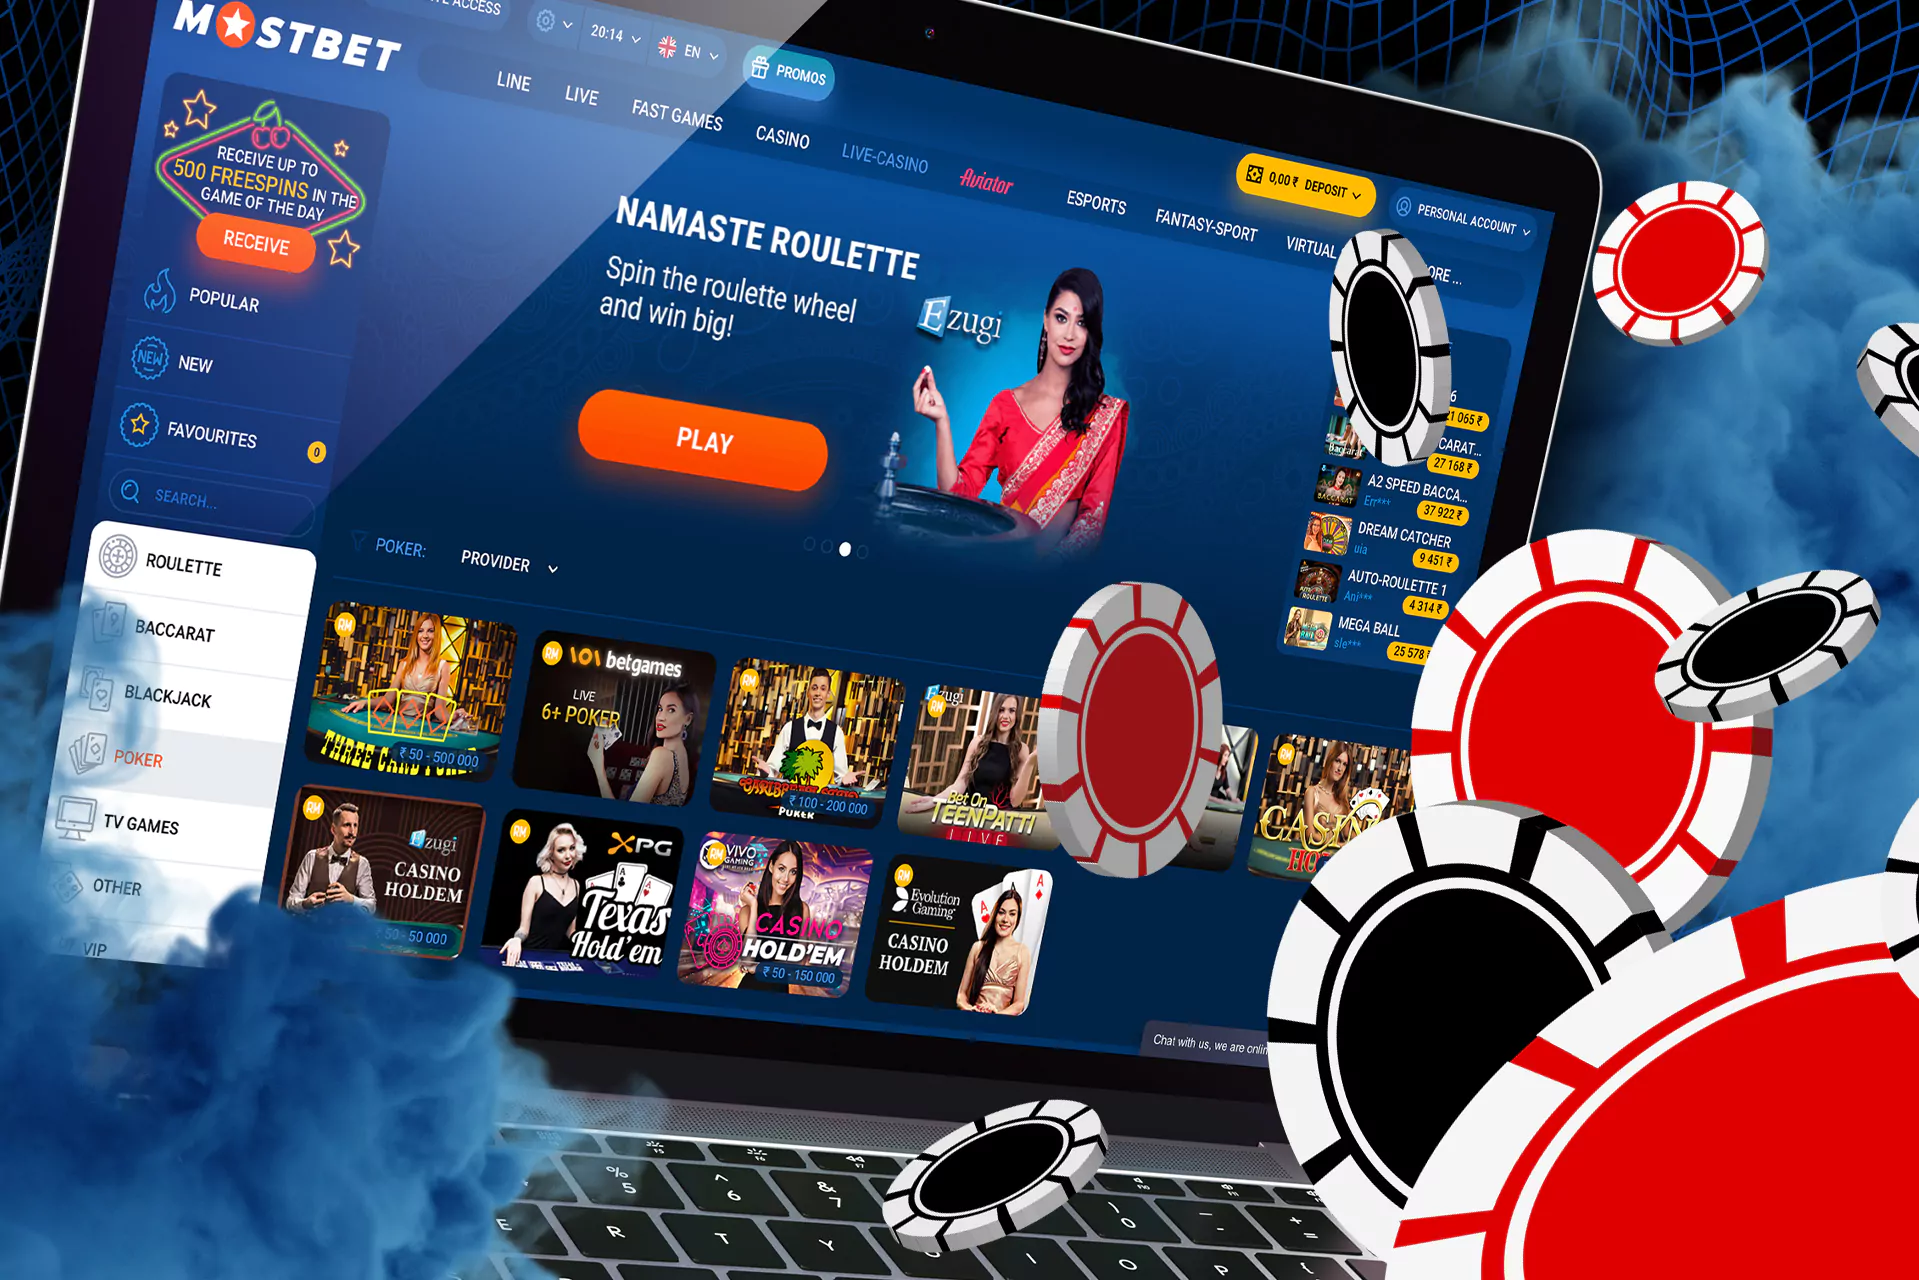 Play different types of poker at the Mostbet casino.